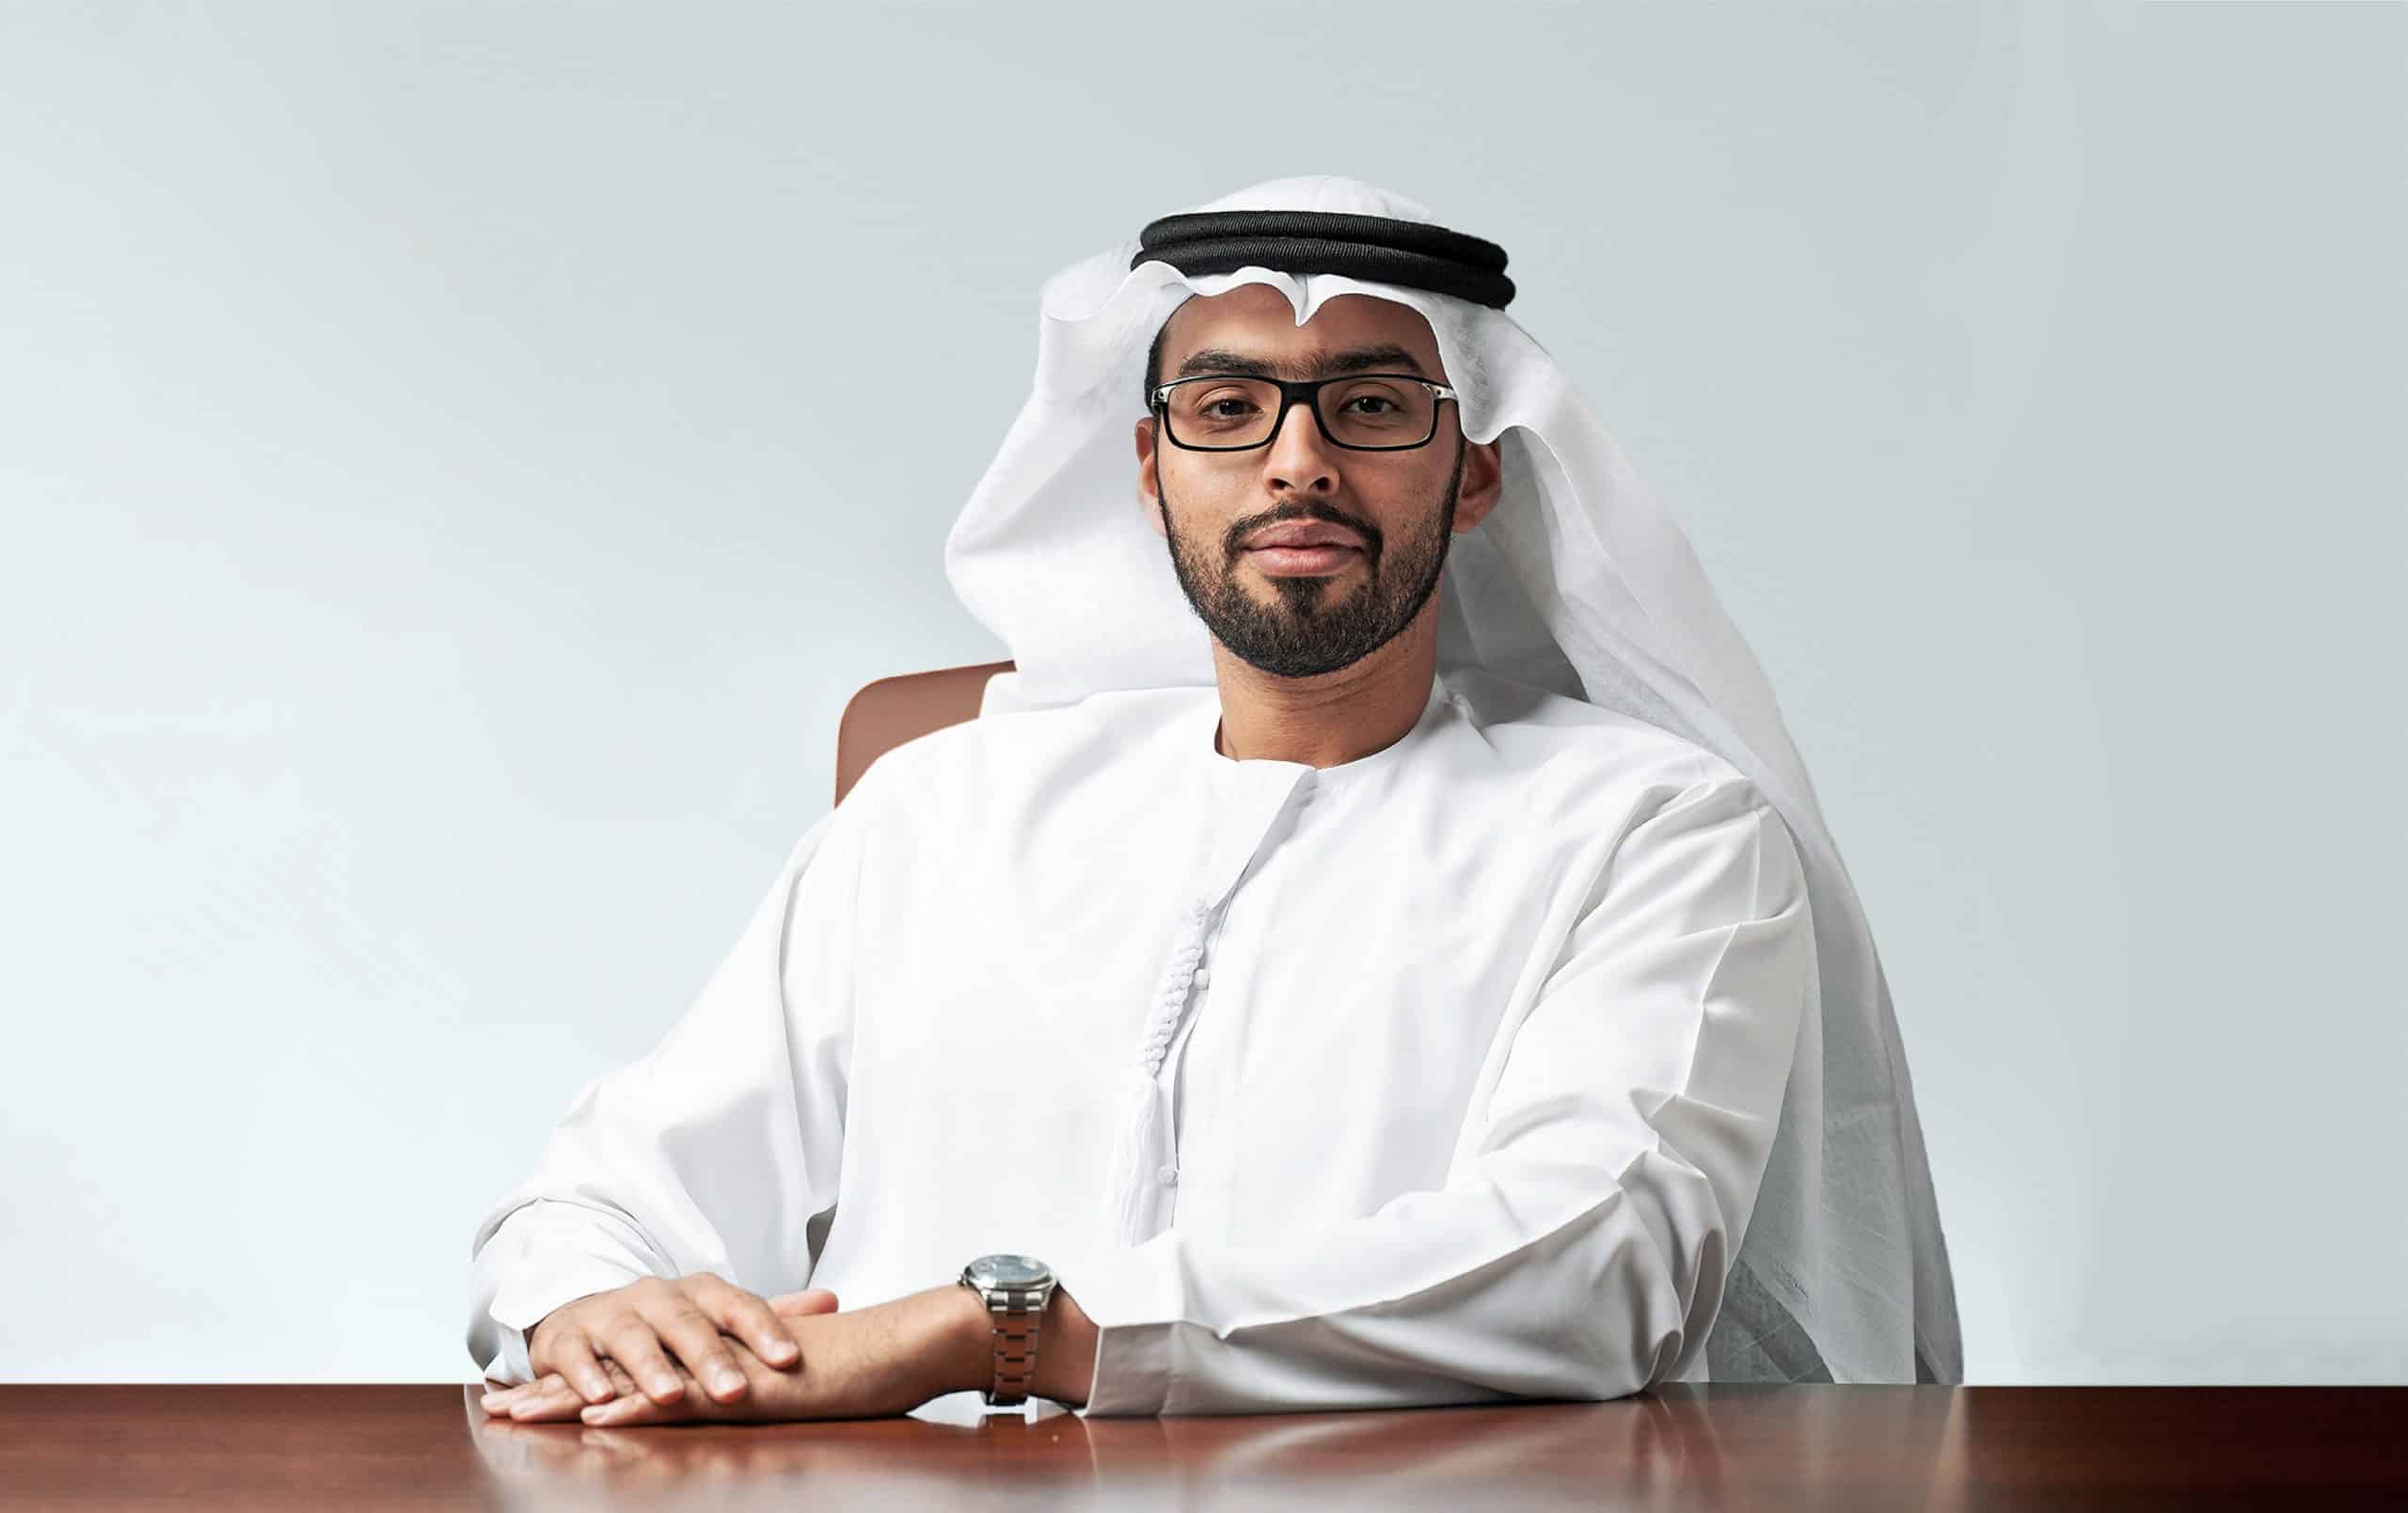 SAFQAT – UAE’s upcoming online B2B marketplace aims to bridge gaps in the F&B industry